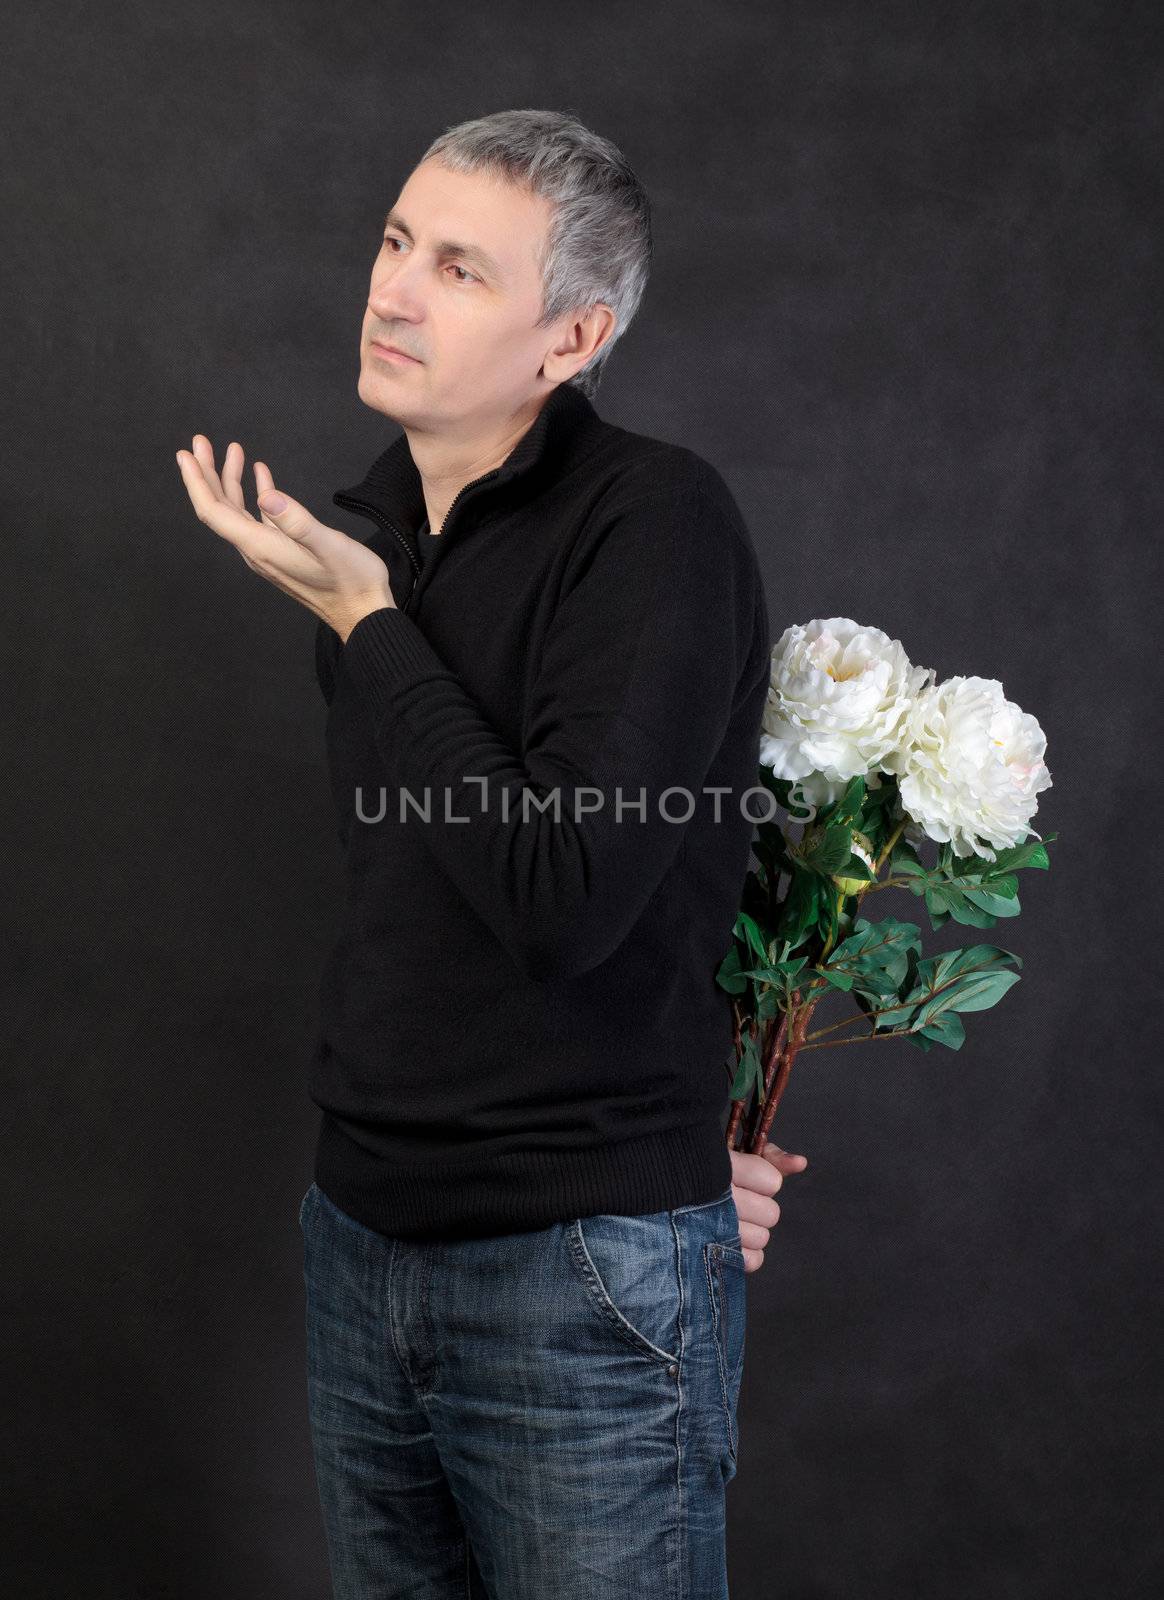 Man hiding a bouquet of flowers by Discovod